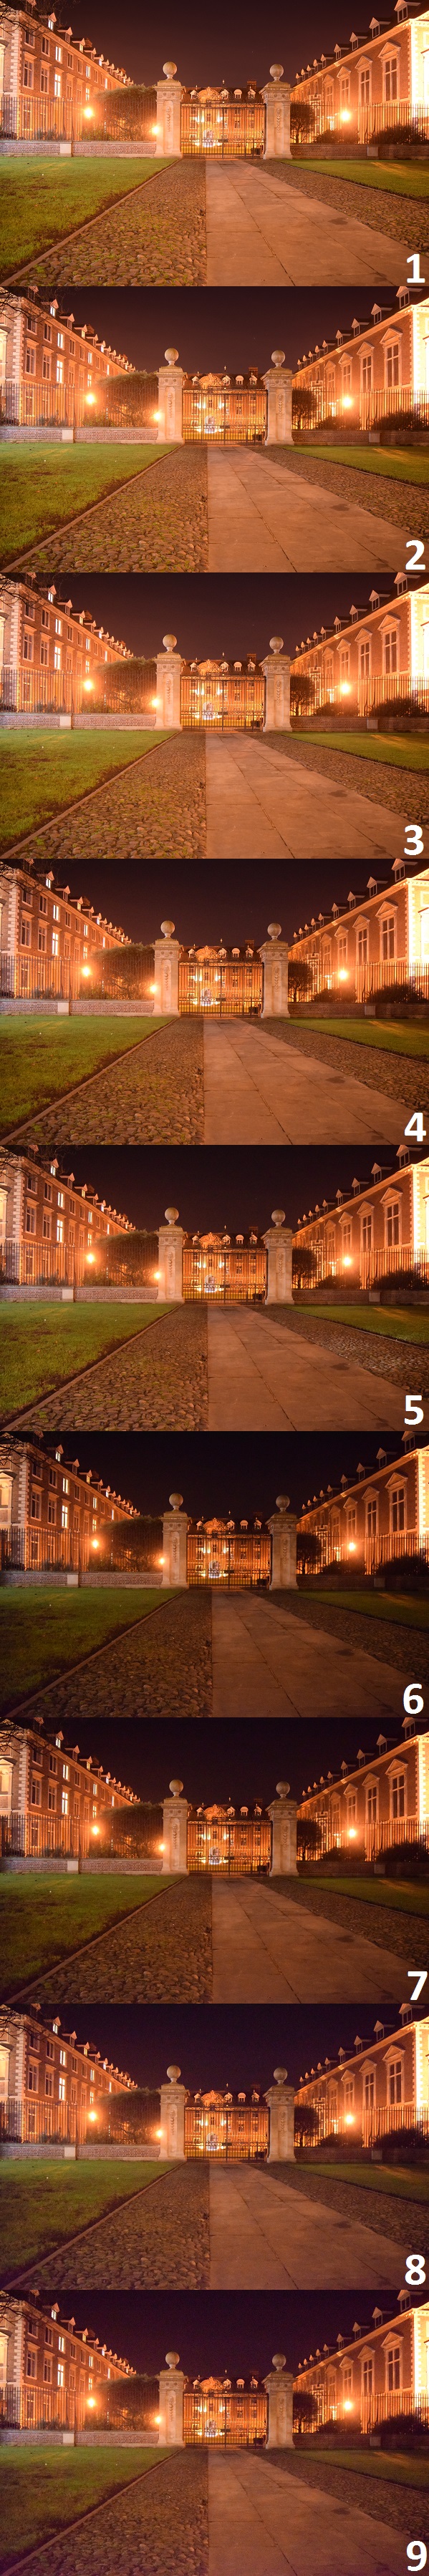 Nikon D5300 the same photo in different ISO and time exposure effects, St. Catharine's College University of Cambridge